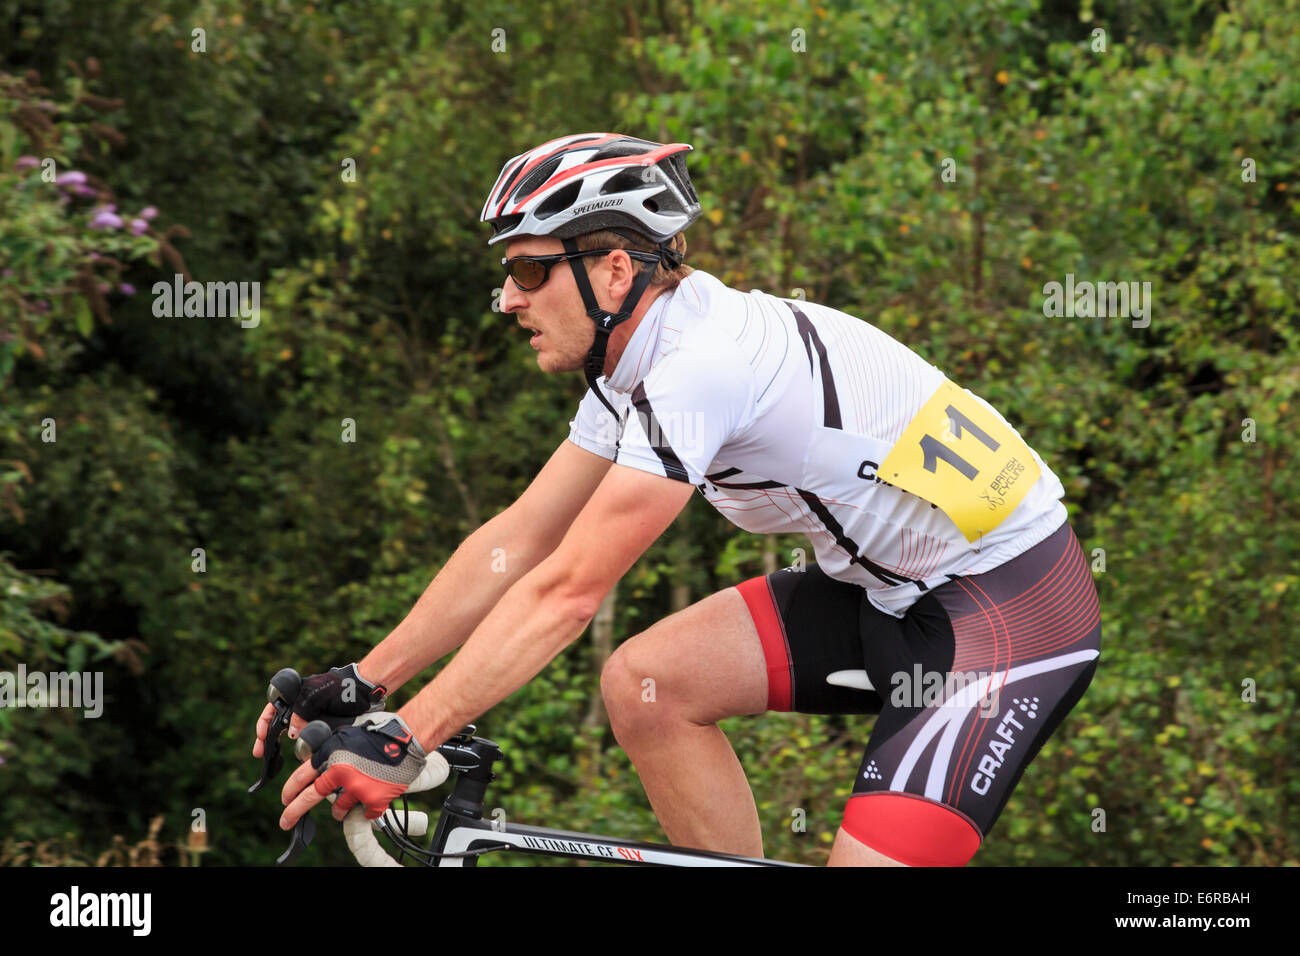 A Millennial man wearing Lycra and a cycle helmet racing in a local bike race organised by British Cycling. England UK Britain Stock Photo